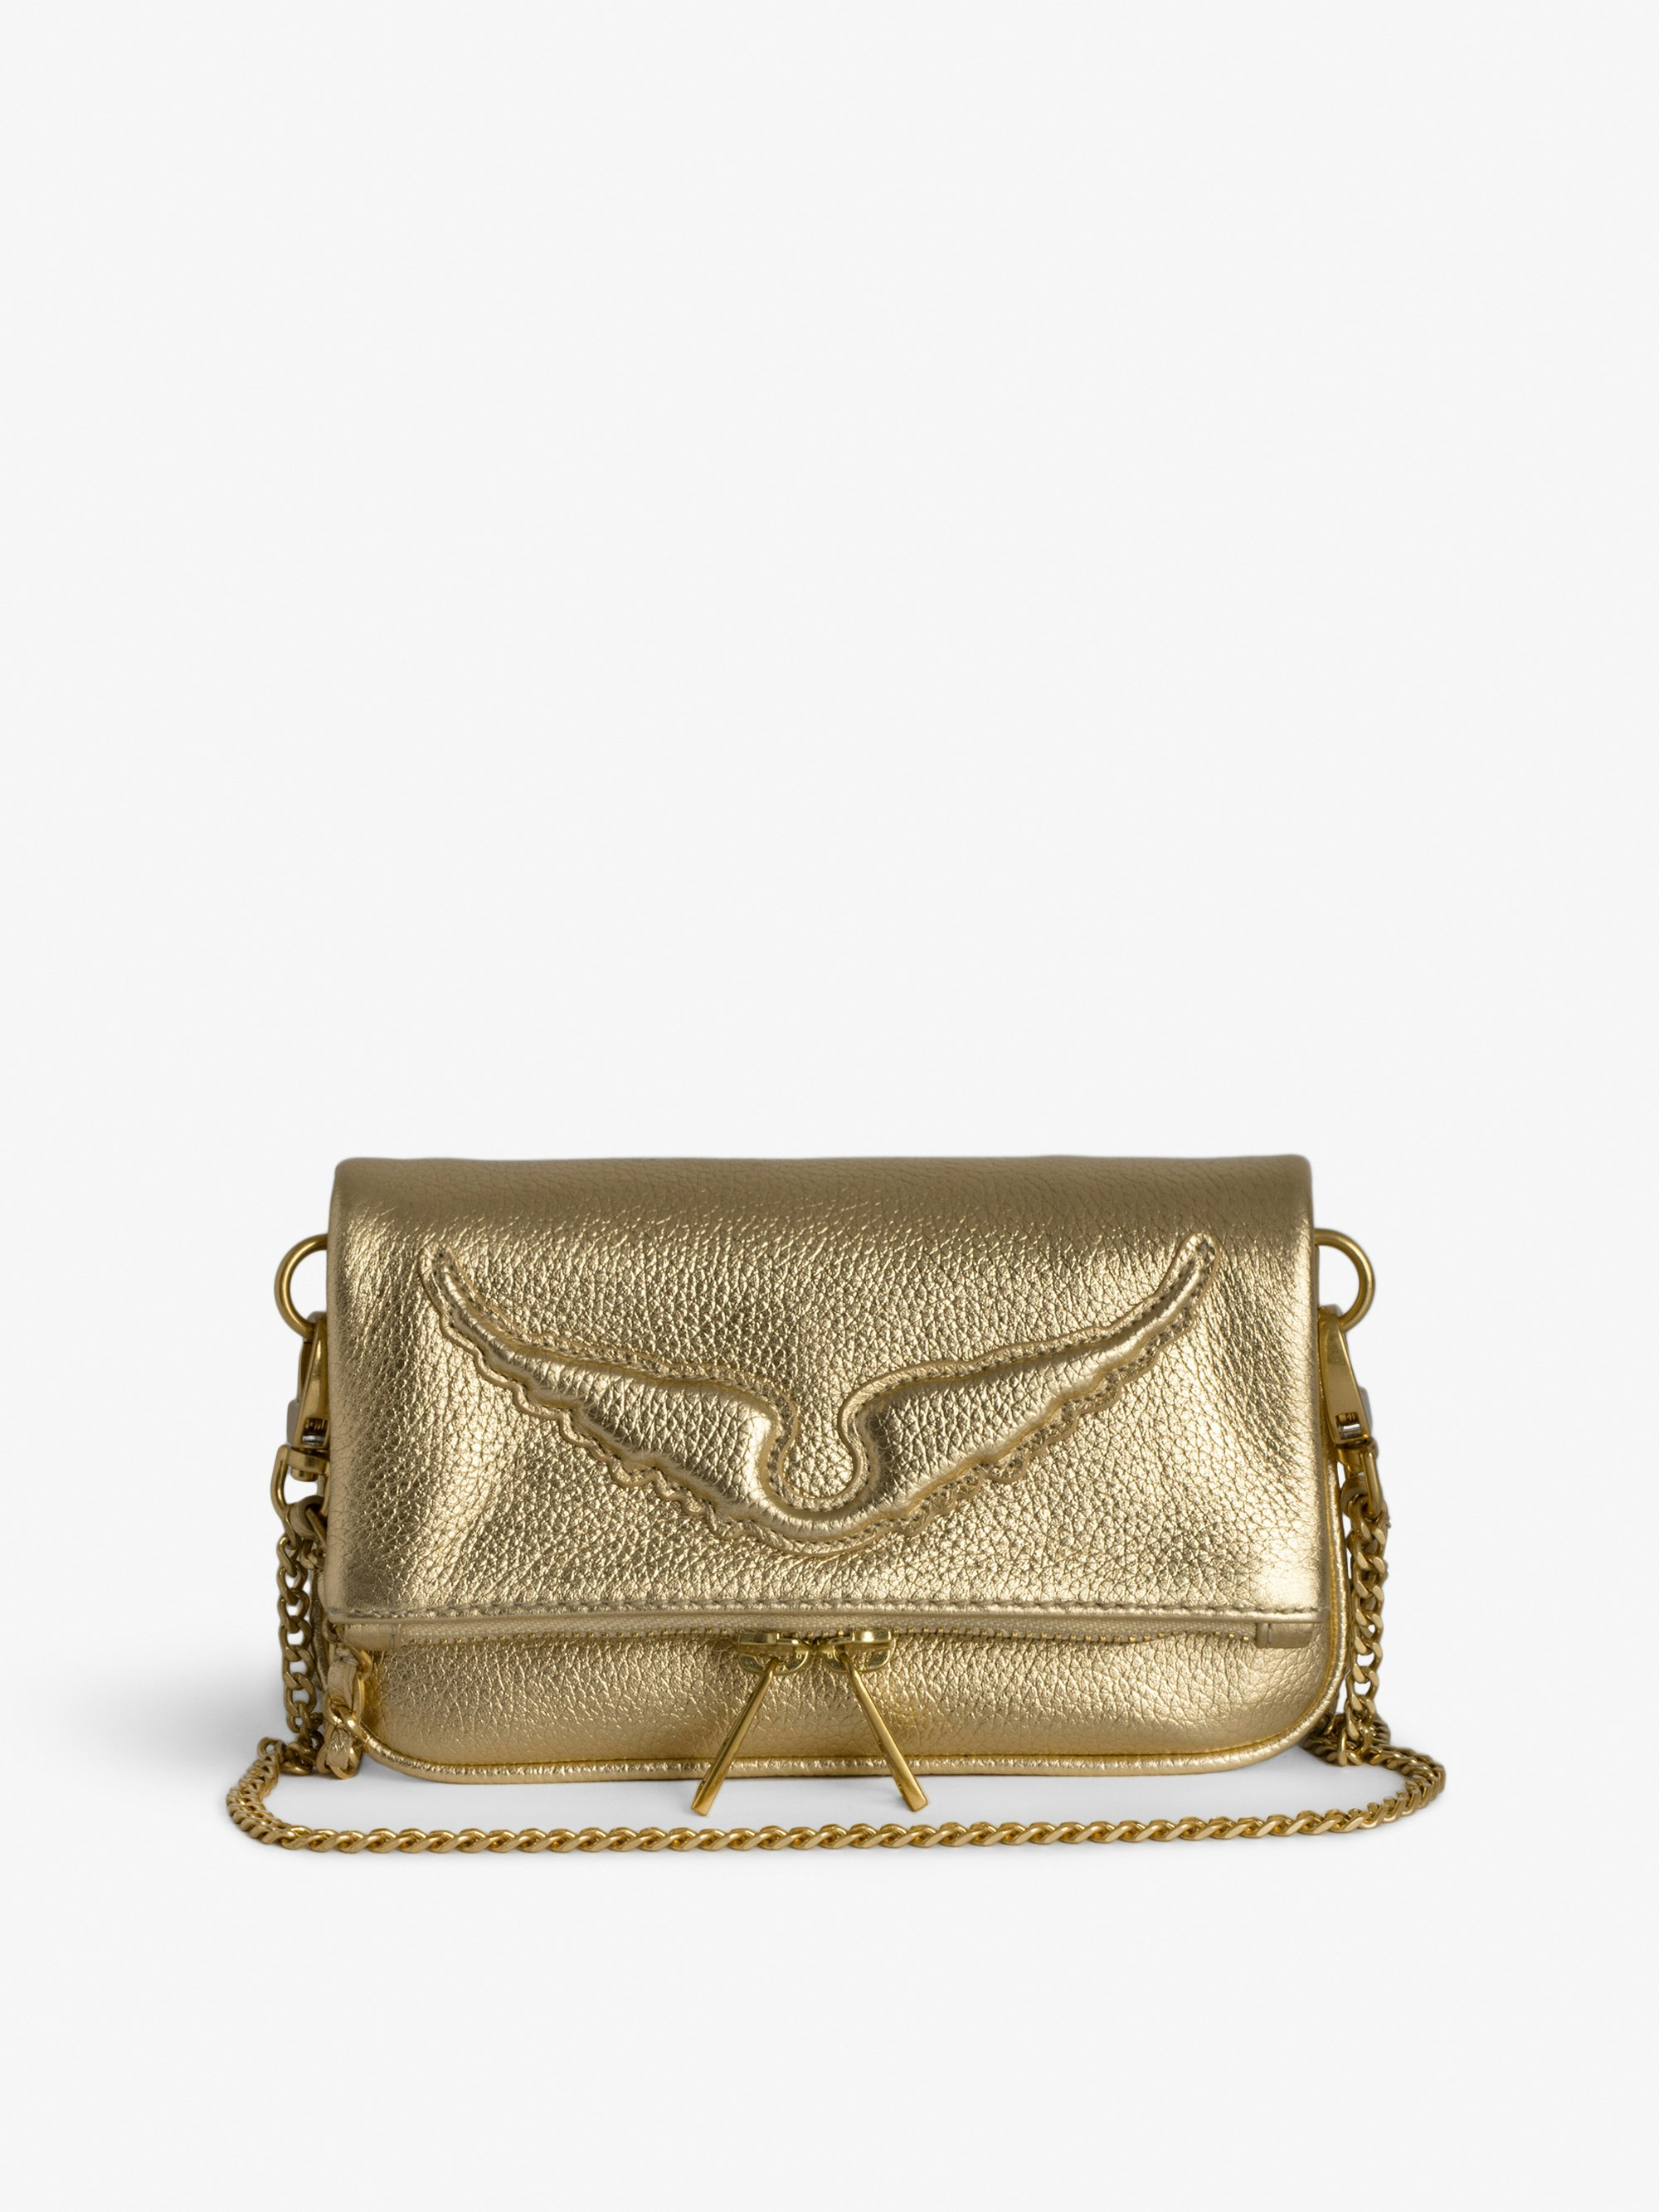 Rock Nano Clutch - Small metallic gold grained leather clutch with double chain and signature embossed wings.